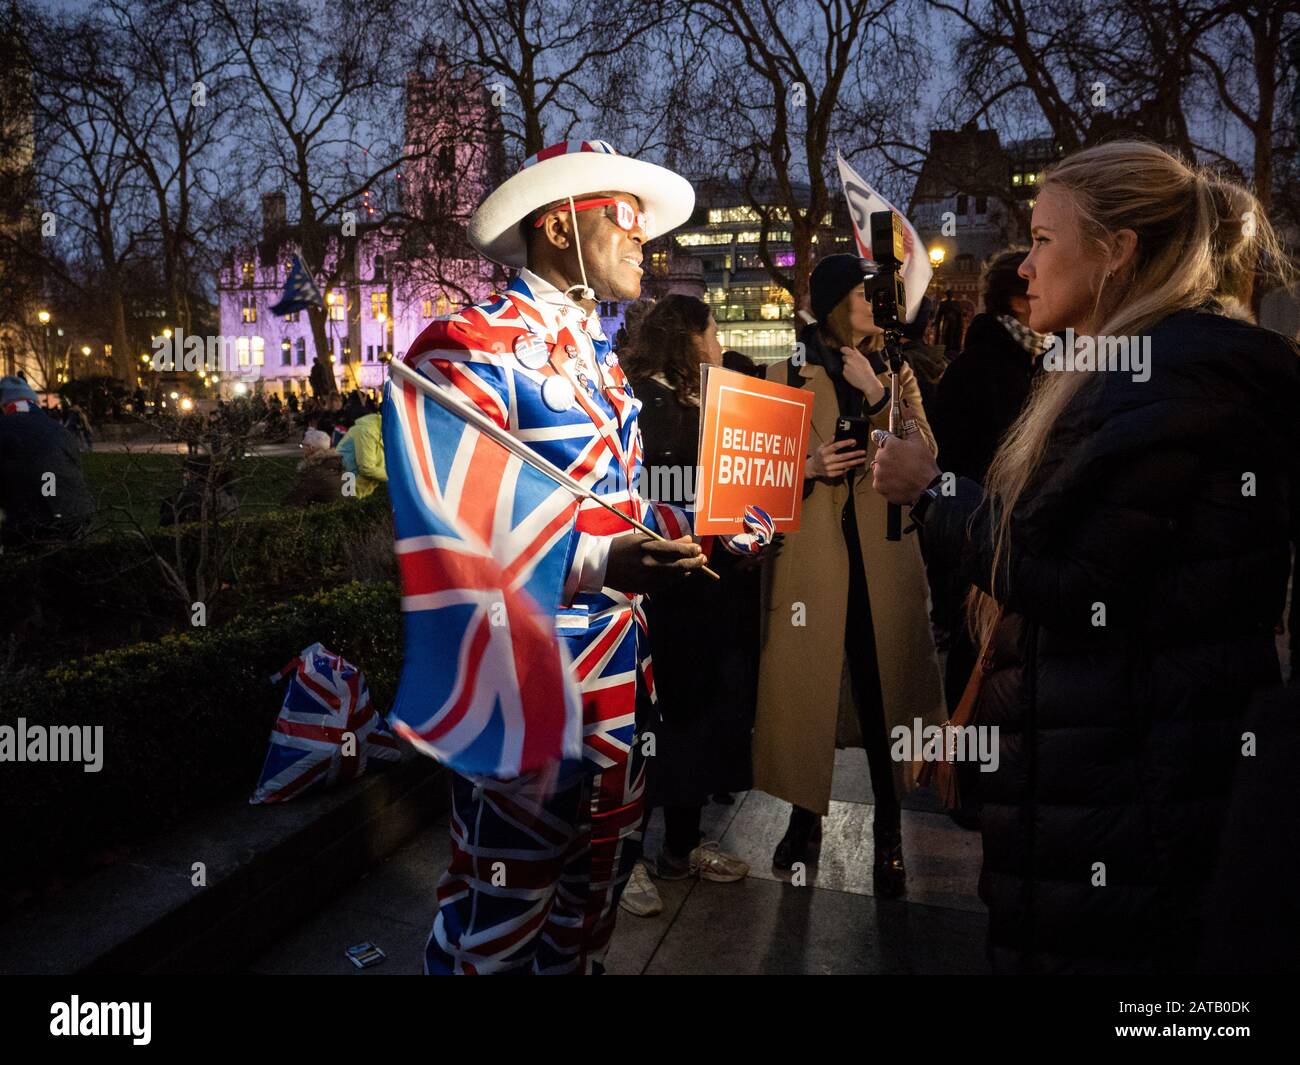 Brexit day 31st Jan 2020 in Parliament square, London, England. Man in Union Jack costume is interviewed. Stock Photo